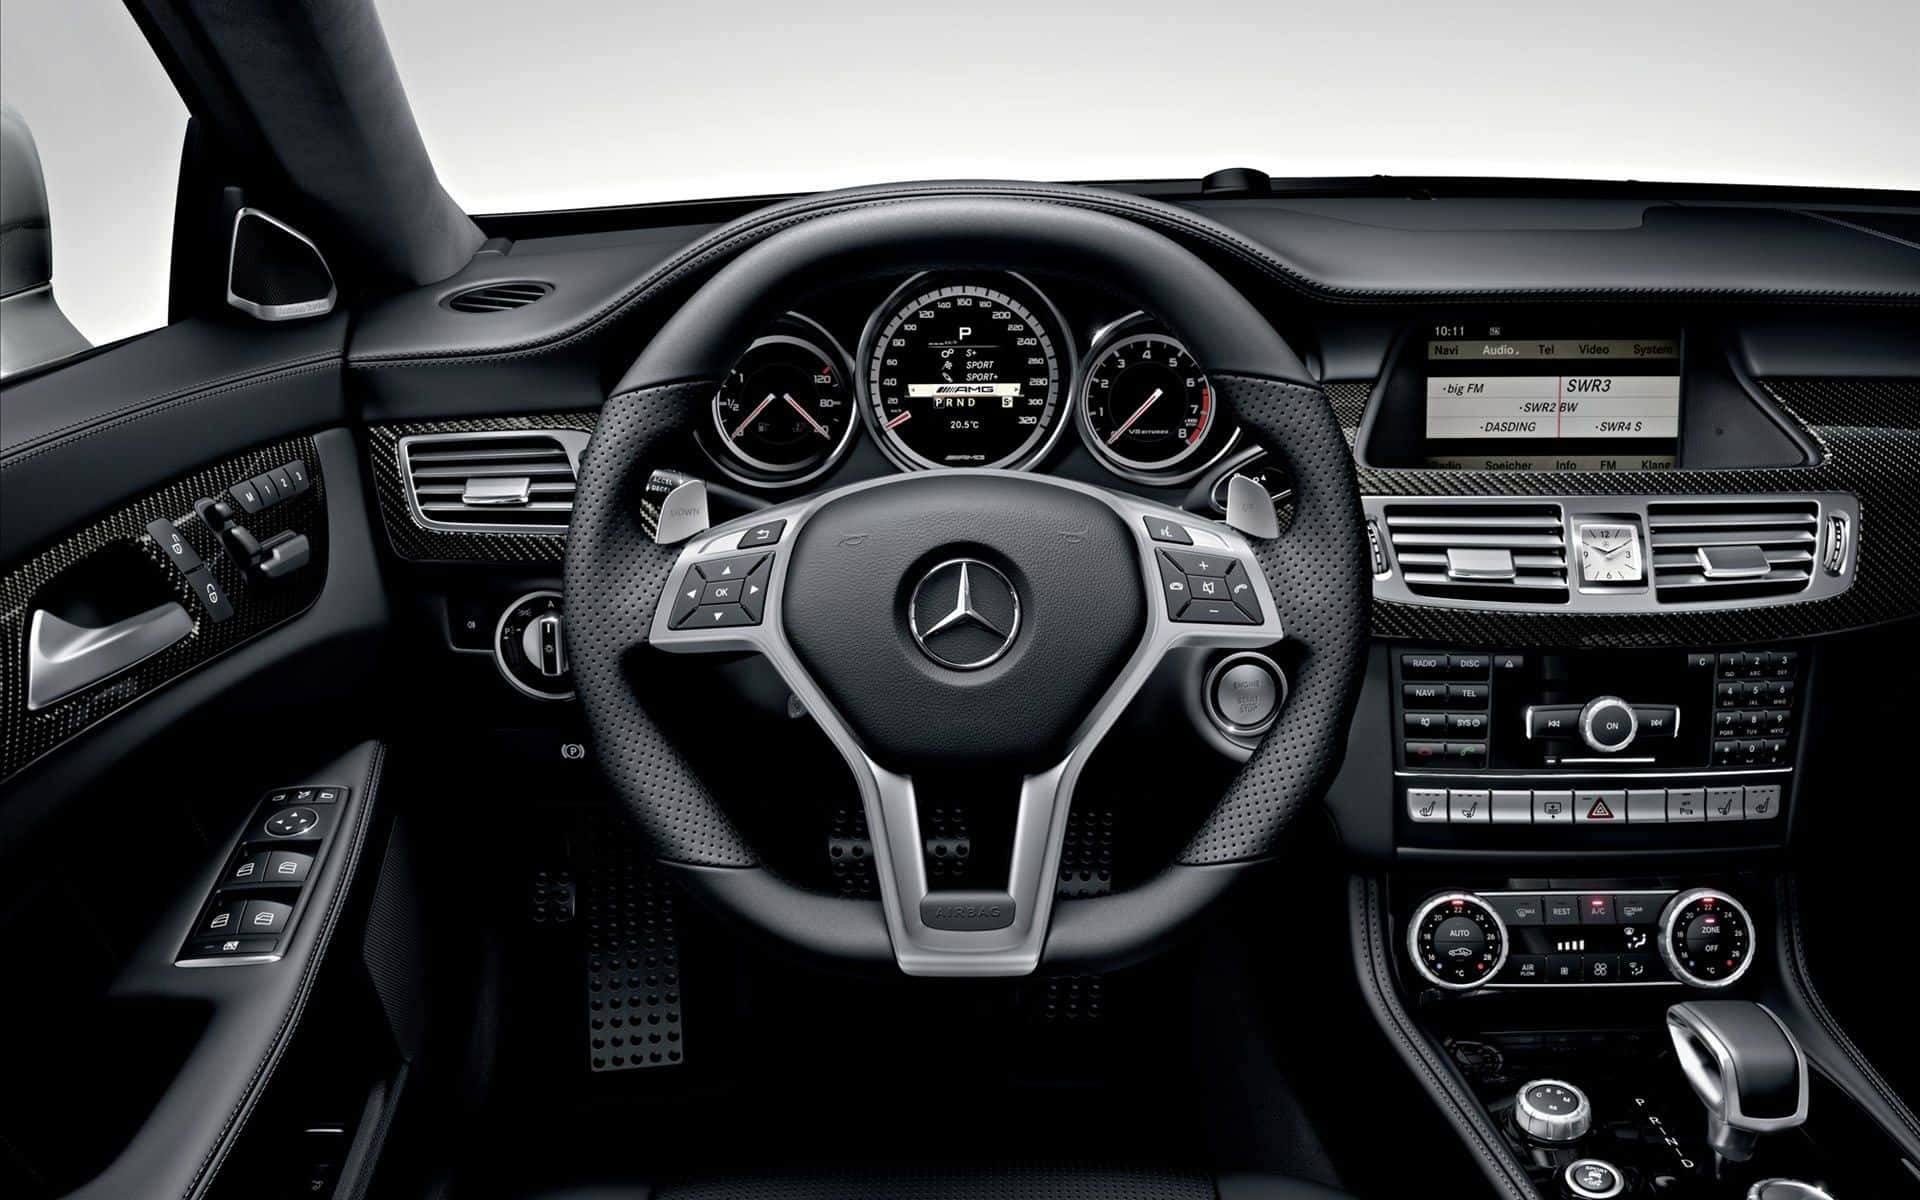 Enjoy the sophisticated interior and amenities of this car Wallpaper